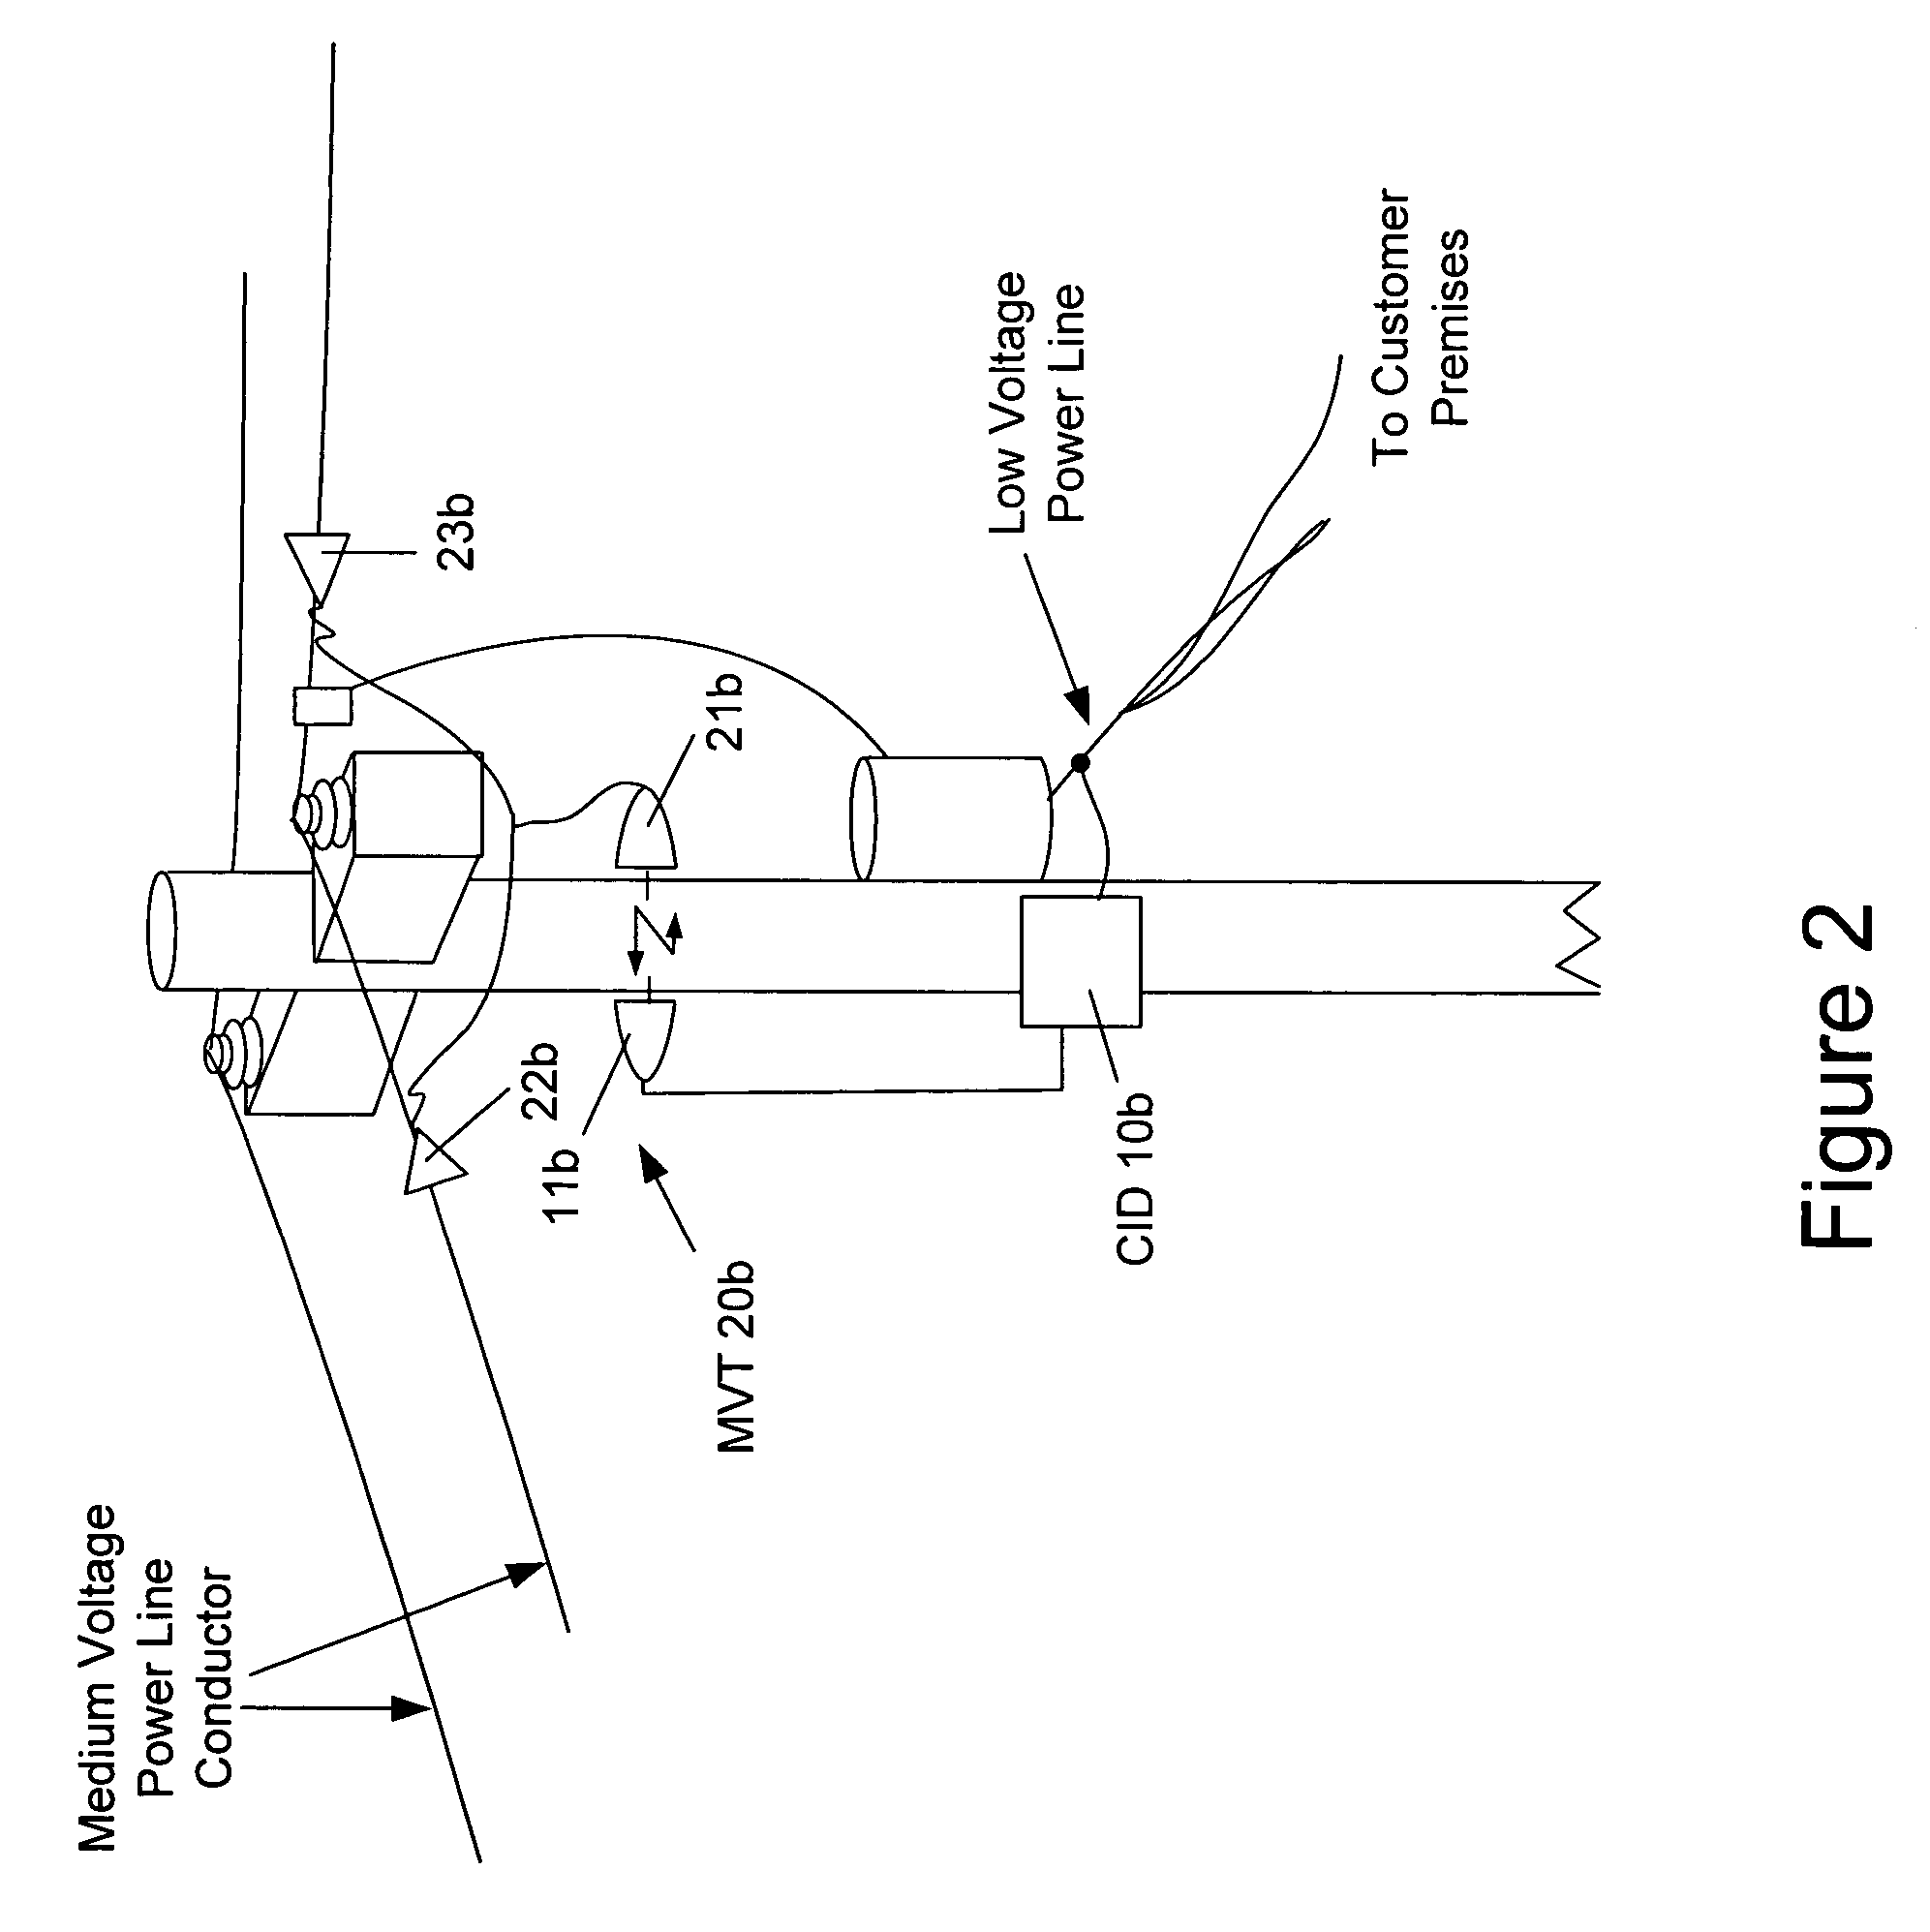 Surface wave power line communications system and method